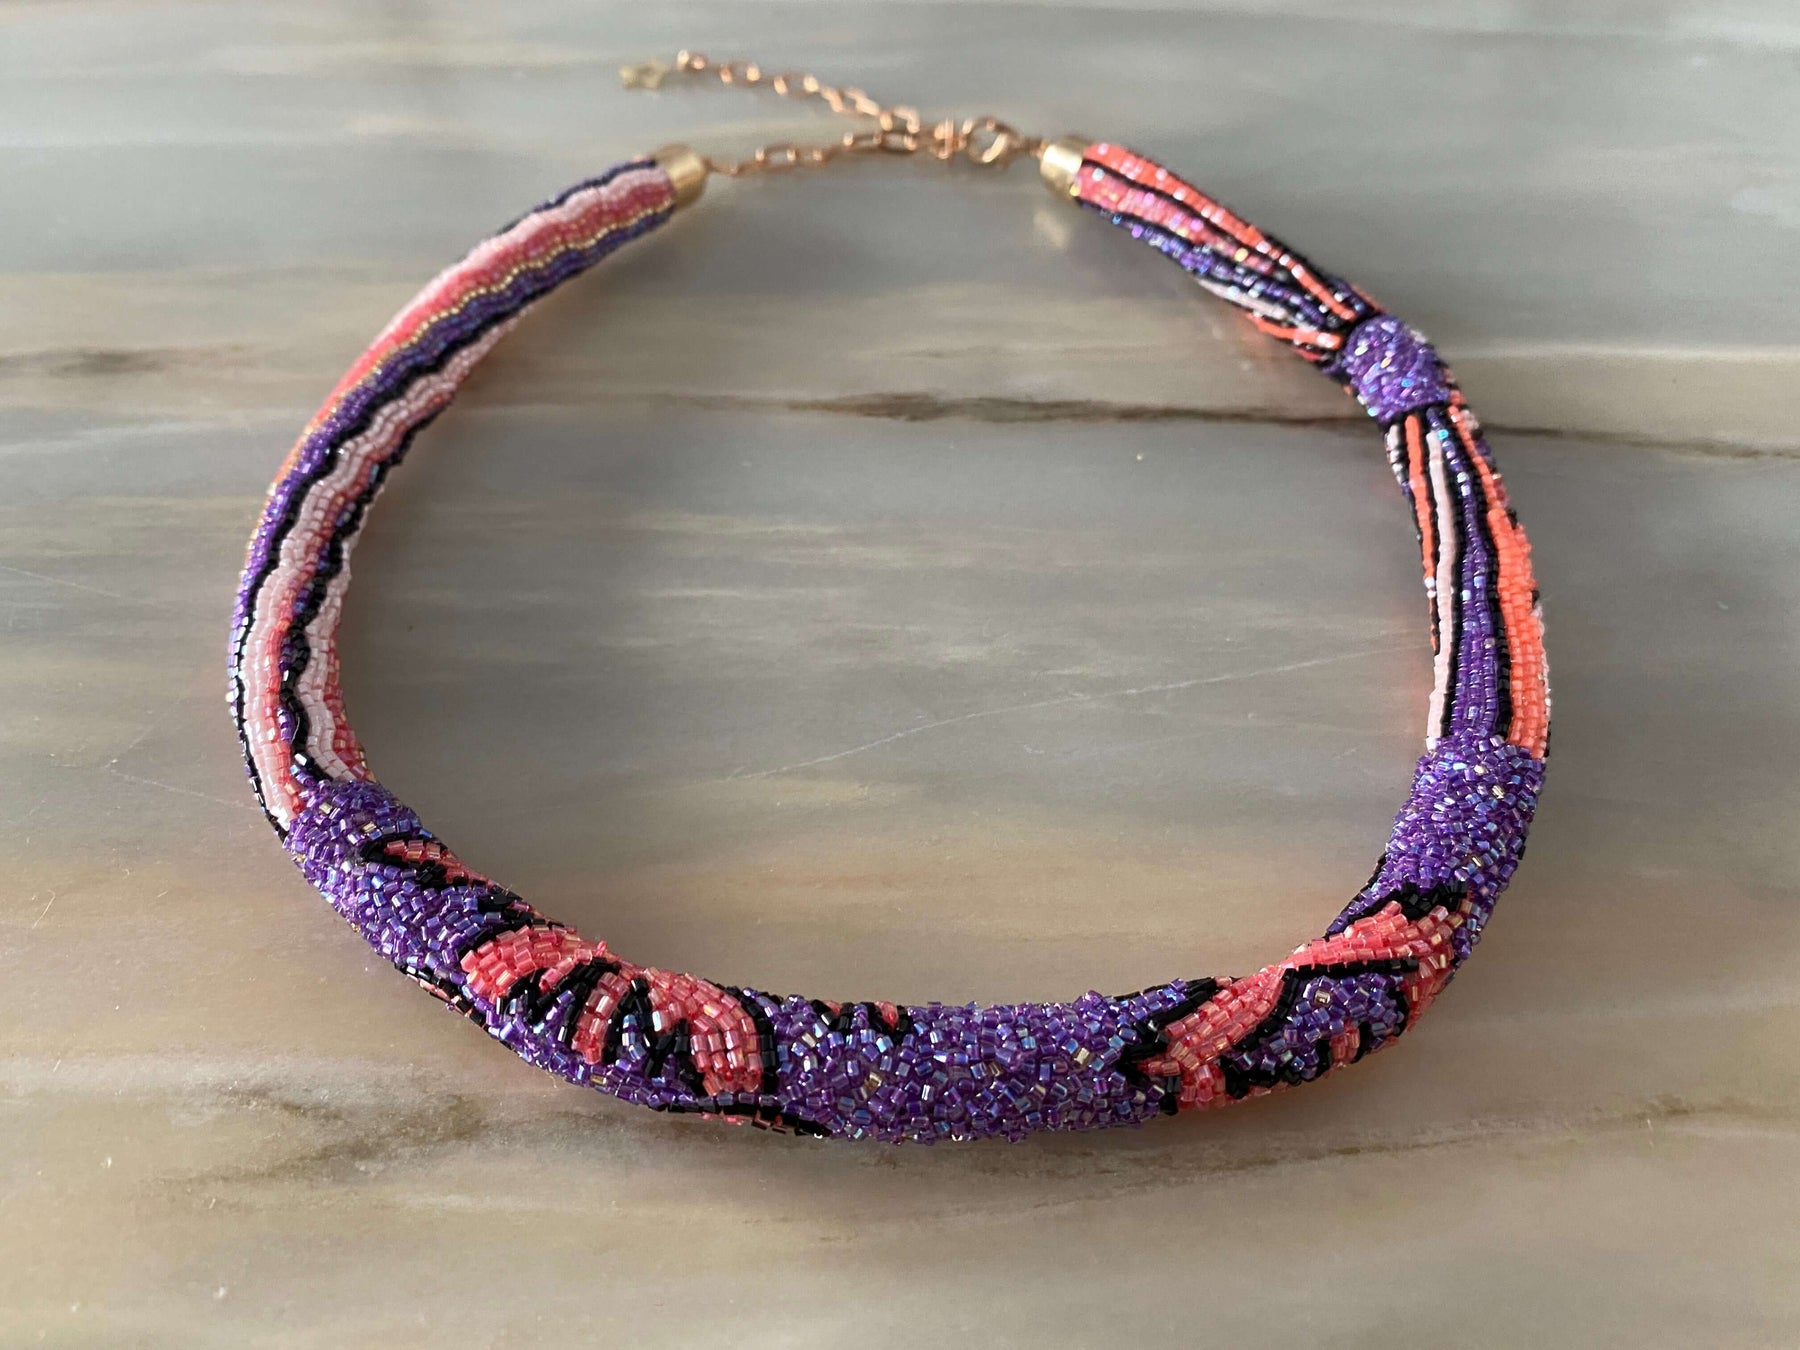 Heimstone x Olivia Dar - Necklace in Mosaic colors